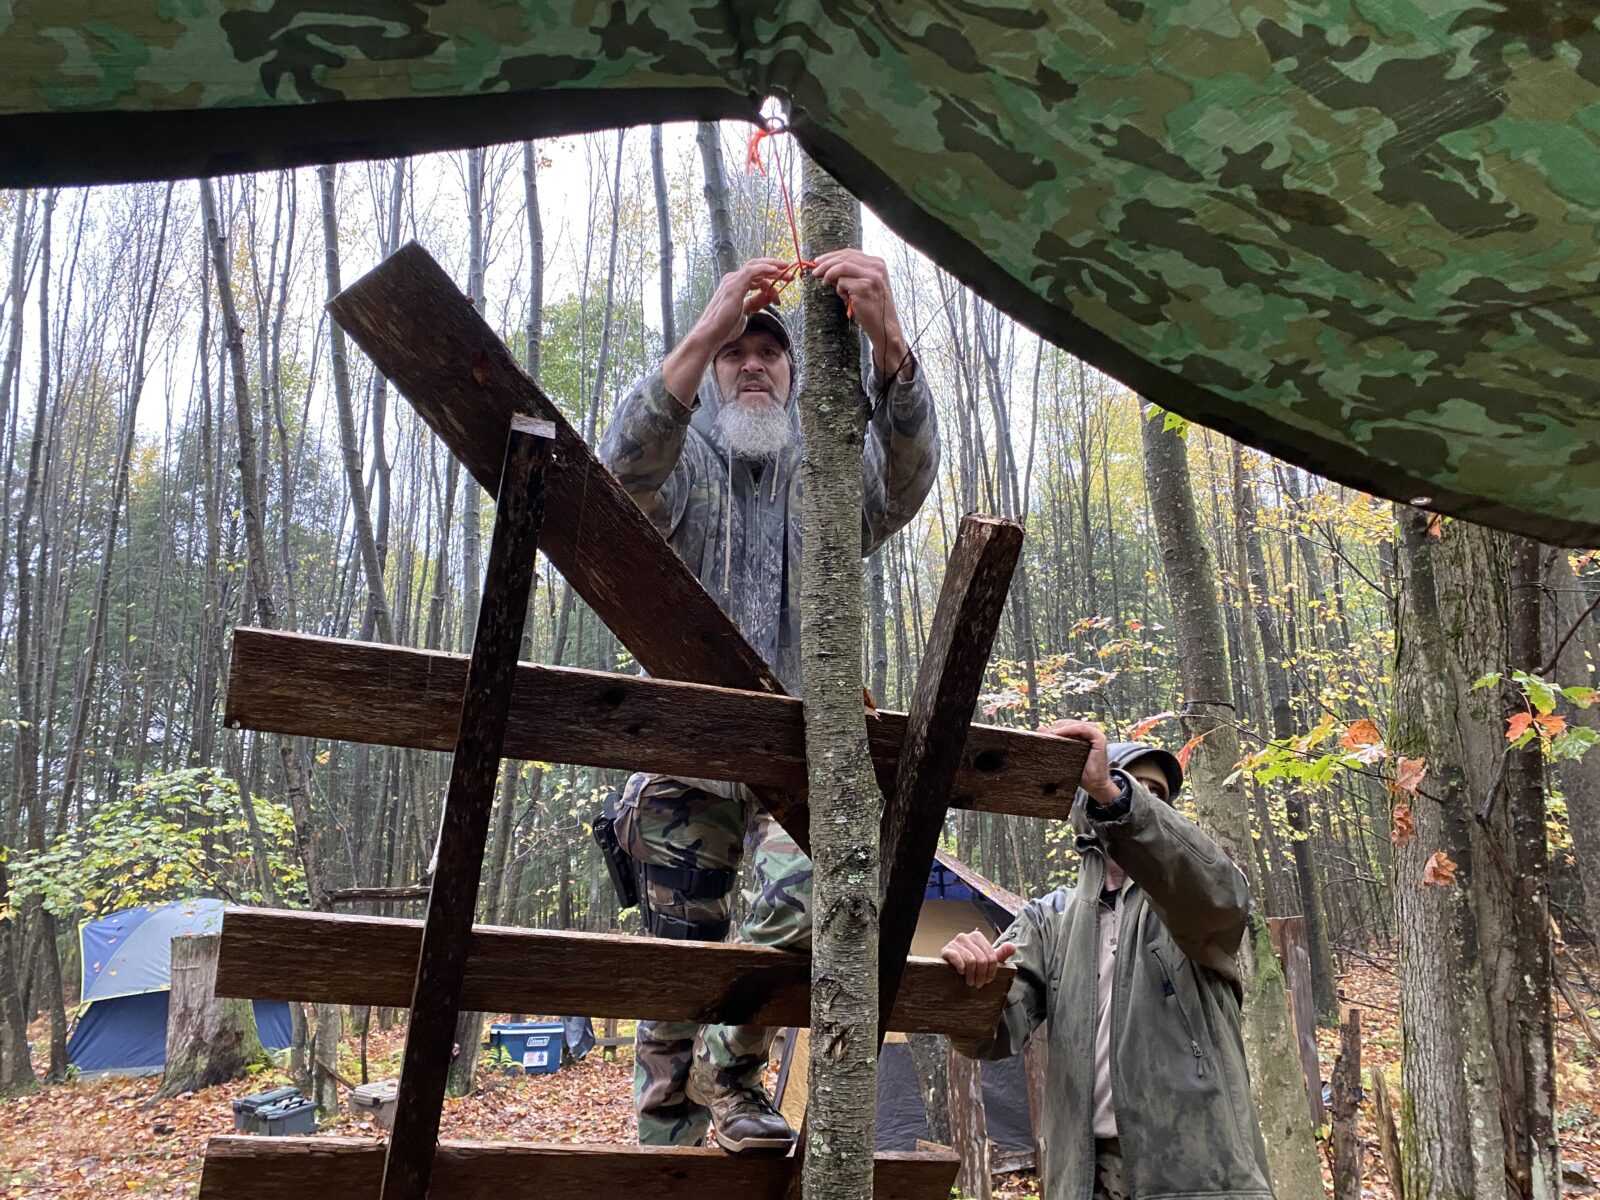 A member of the Pennsylvania Volunteer Militia hangs a tarp during a rainstorm in a remote part of Pennsylvania’s Allegheny Plateau in October. Militias like the Pennsylvania Volunteers have come out to the streets as a kind of self-appointed security presence at protests in recent years, something some experts say ratchets up tensions.